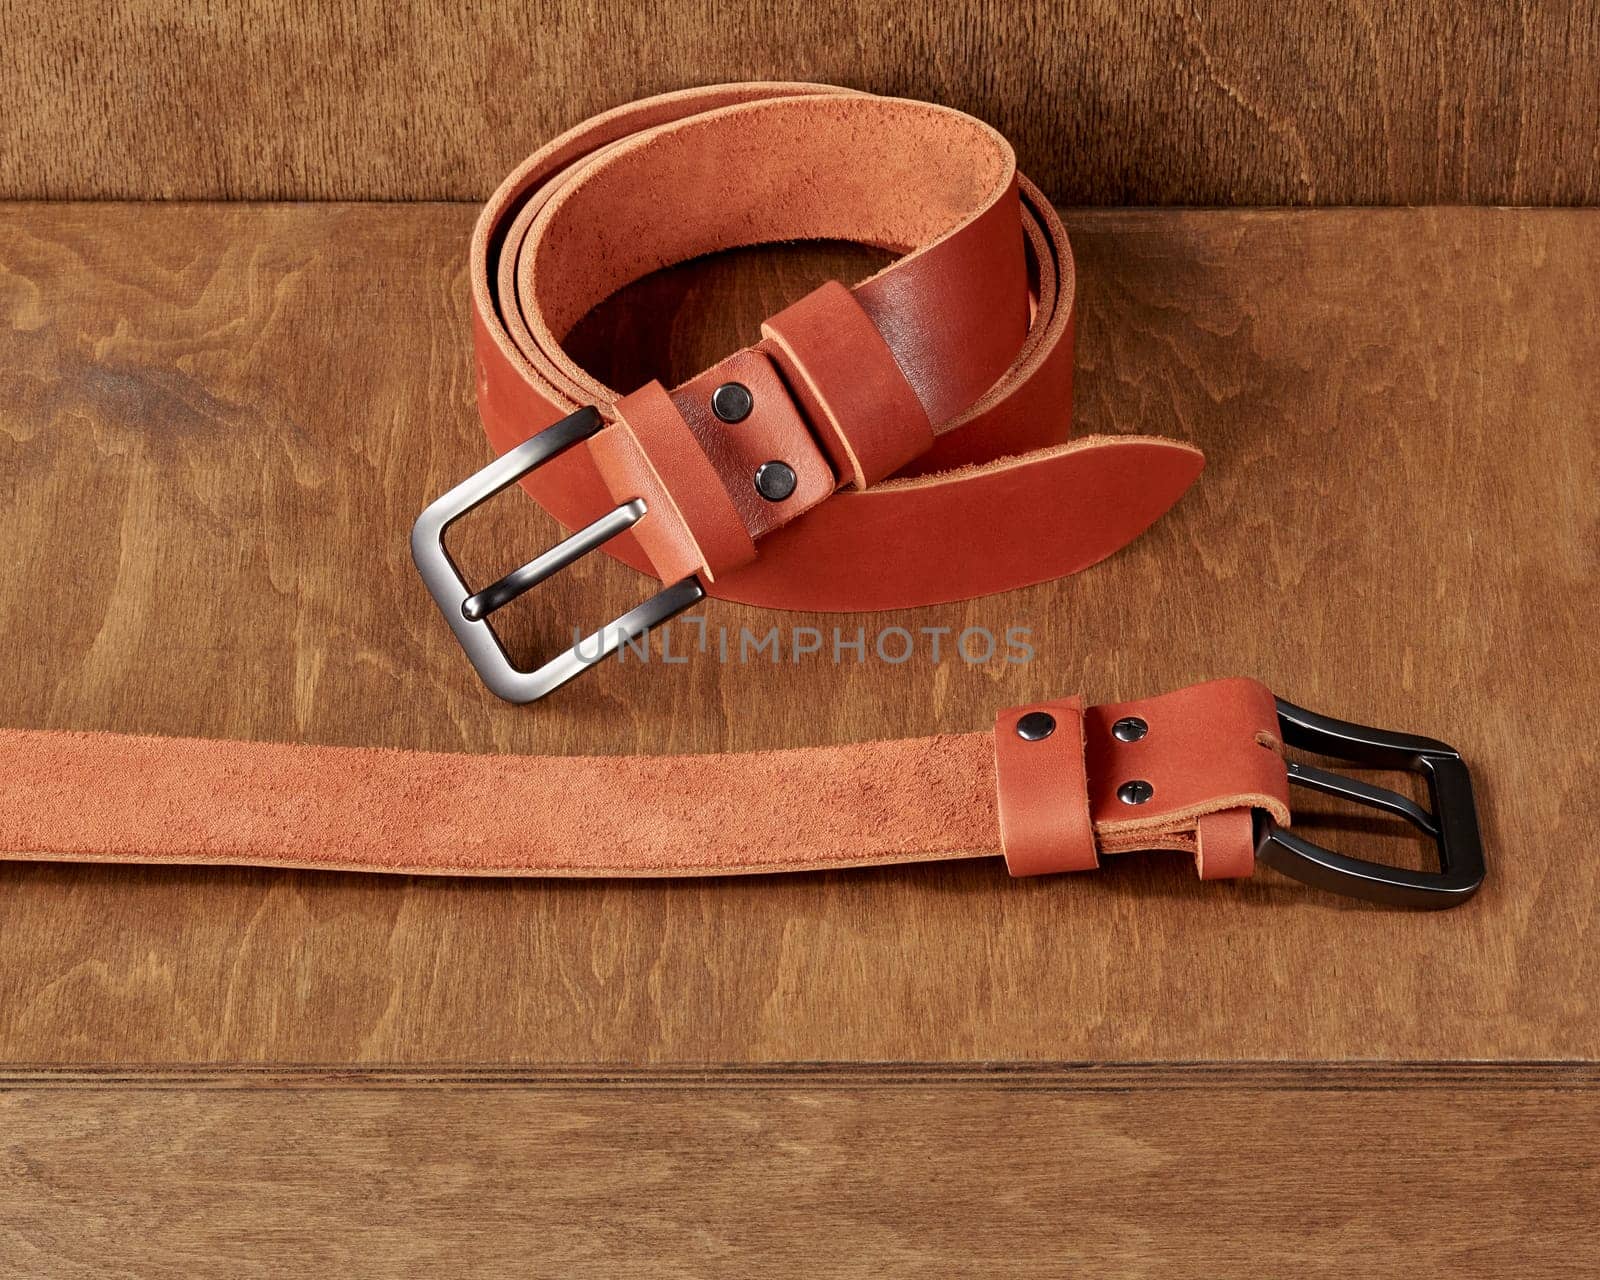 Wooden stand featuring two terracotta leather belts with DAD embossment on loop and humorous inscription engraved on reverse side. Stylish personalized handmade accessories